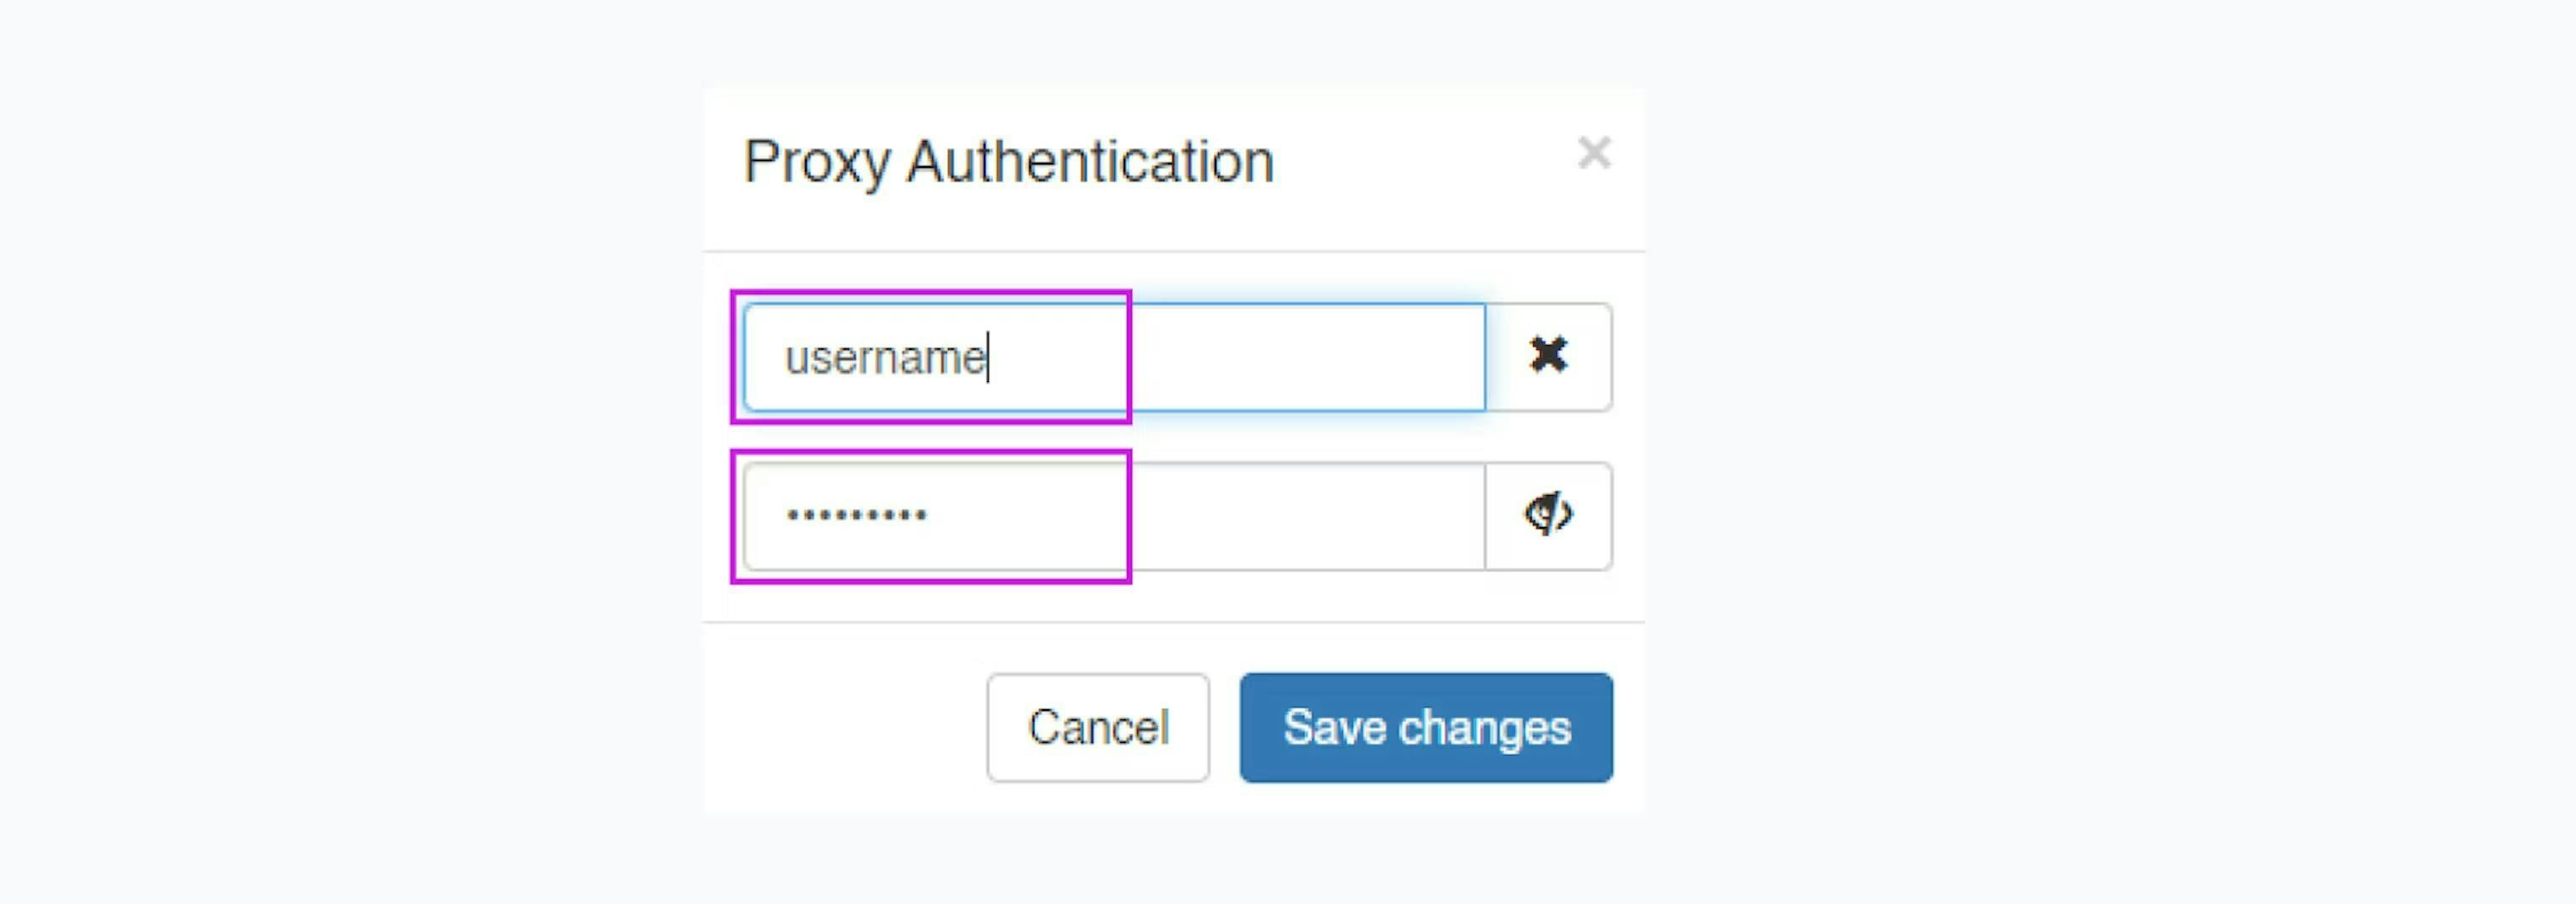 Entering username and password